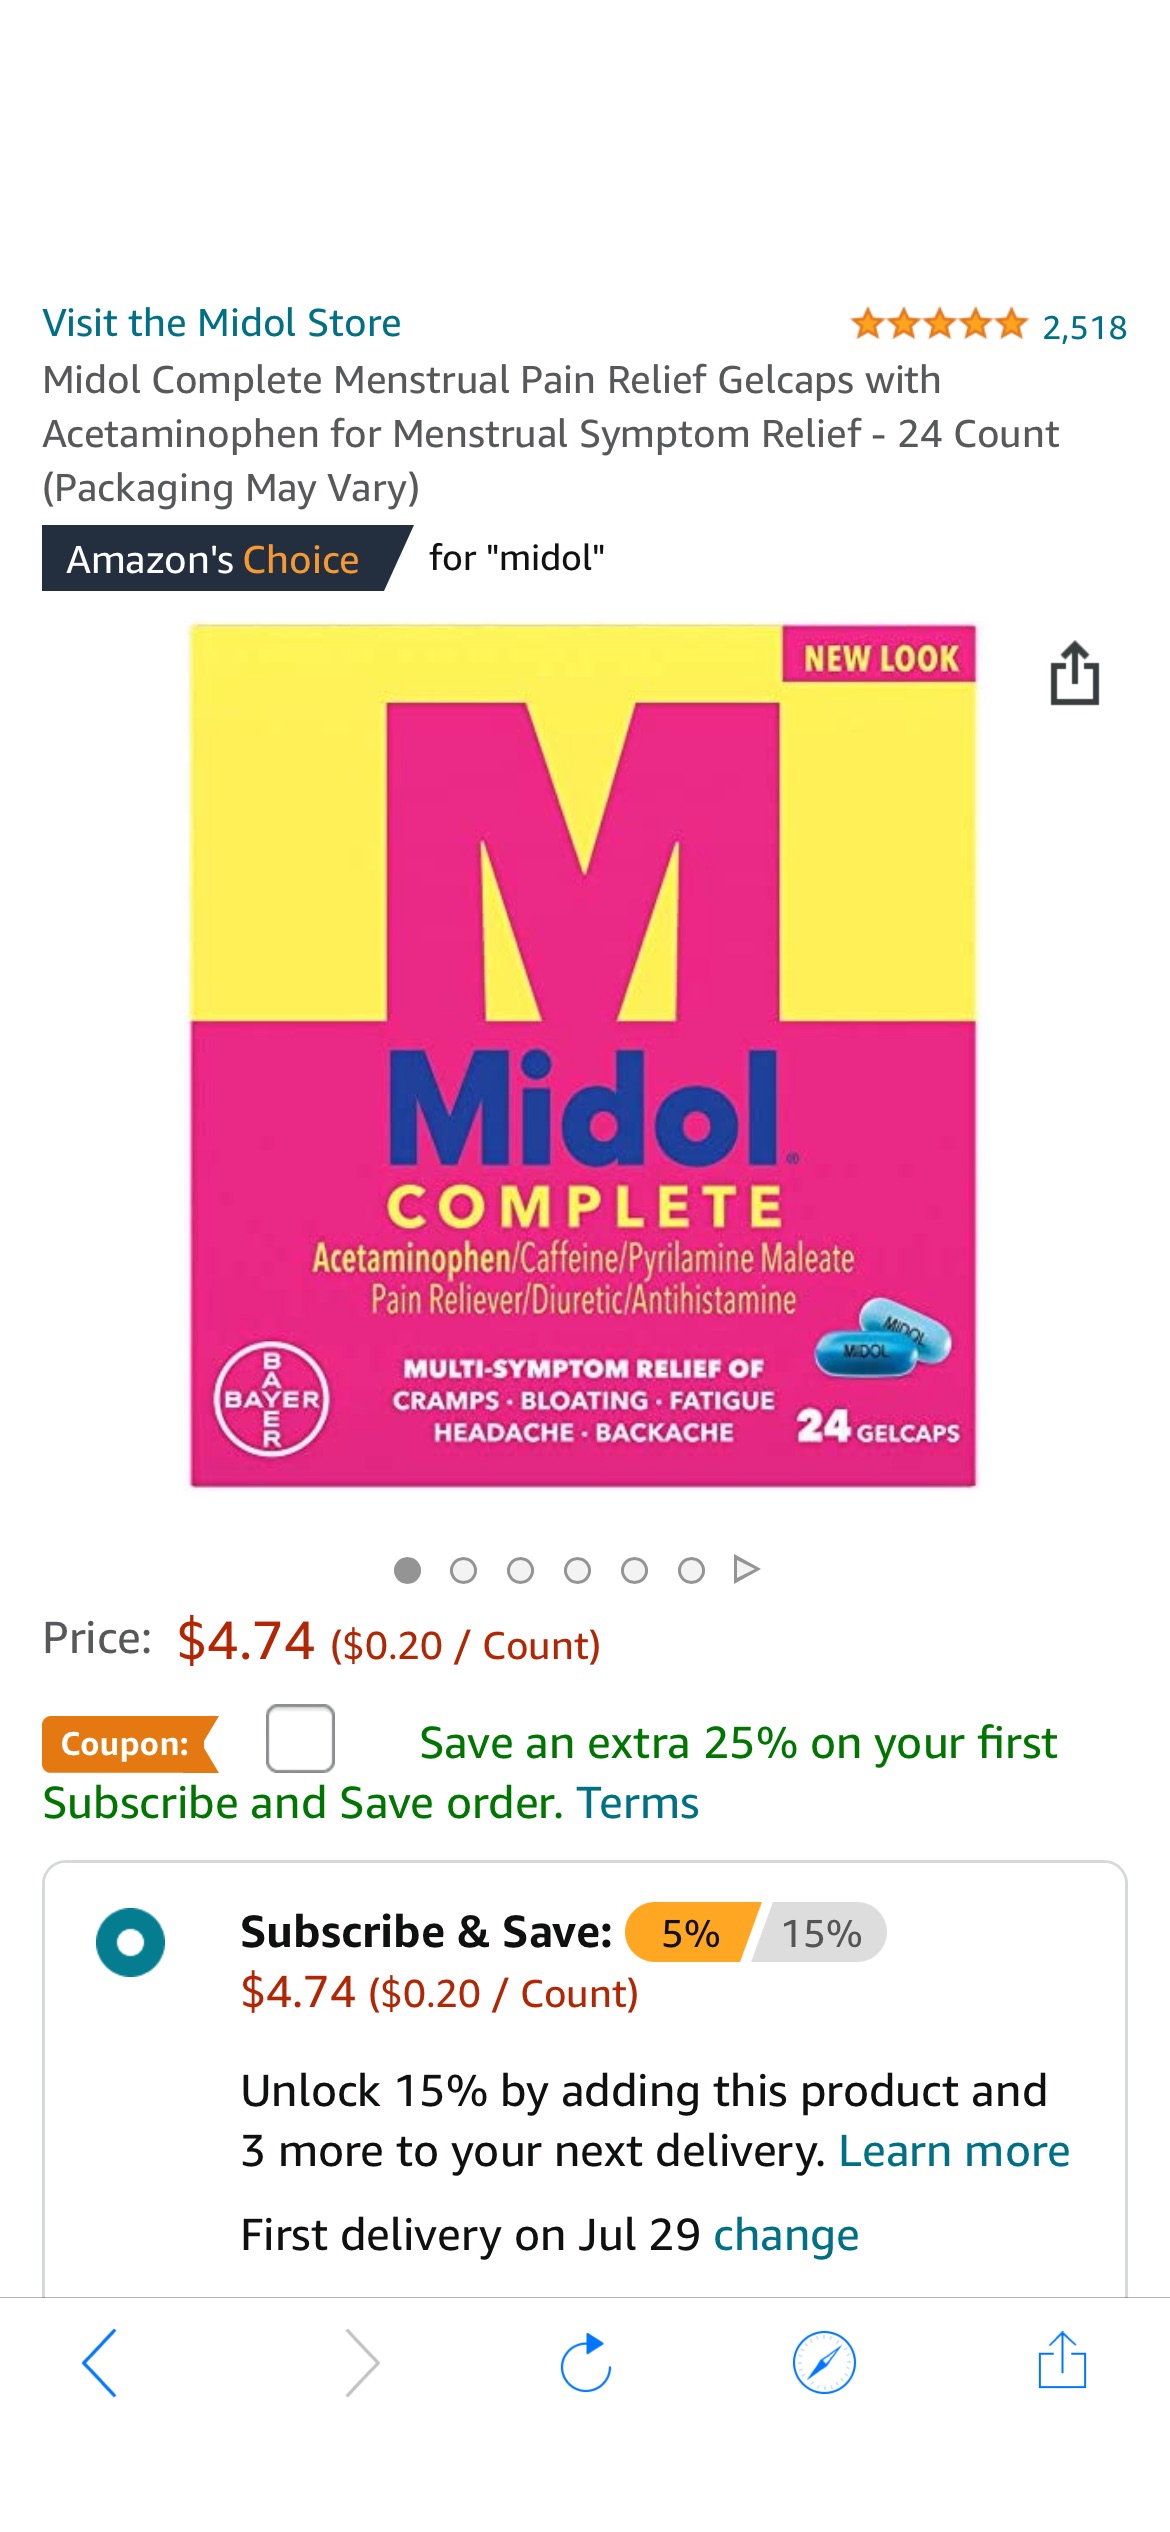 Amazon.com: Midol Complete Menstrual Pain Relief Gelcaps with Acetaminophen for Menstrual Symptom Relief - 24 Count (Packaging May Vary) : Health & 止痛片20%off